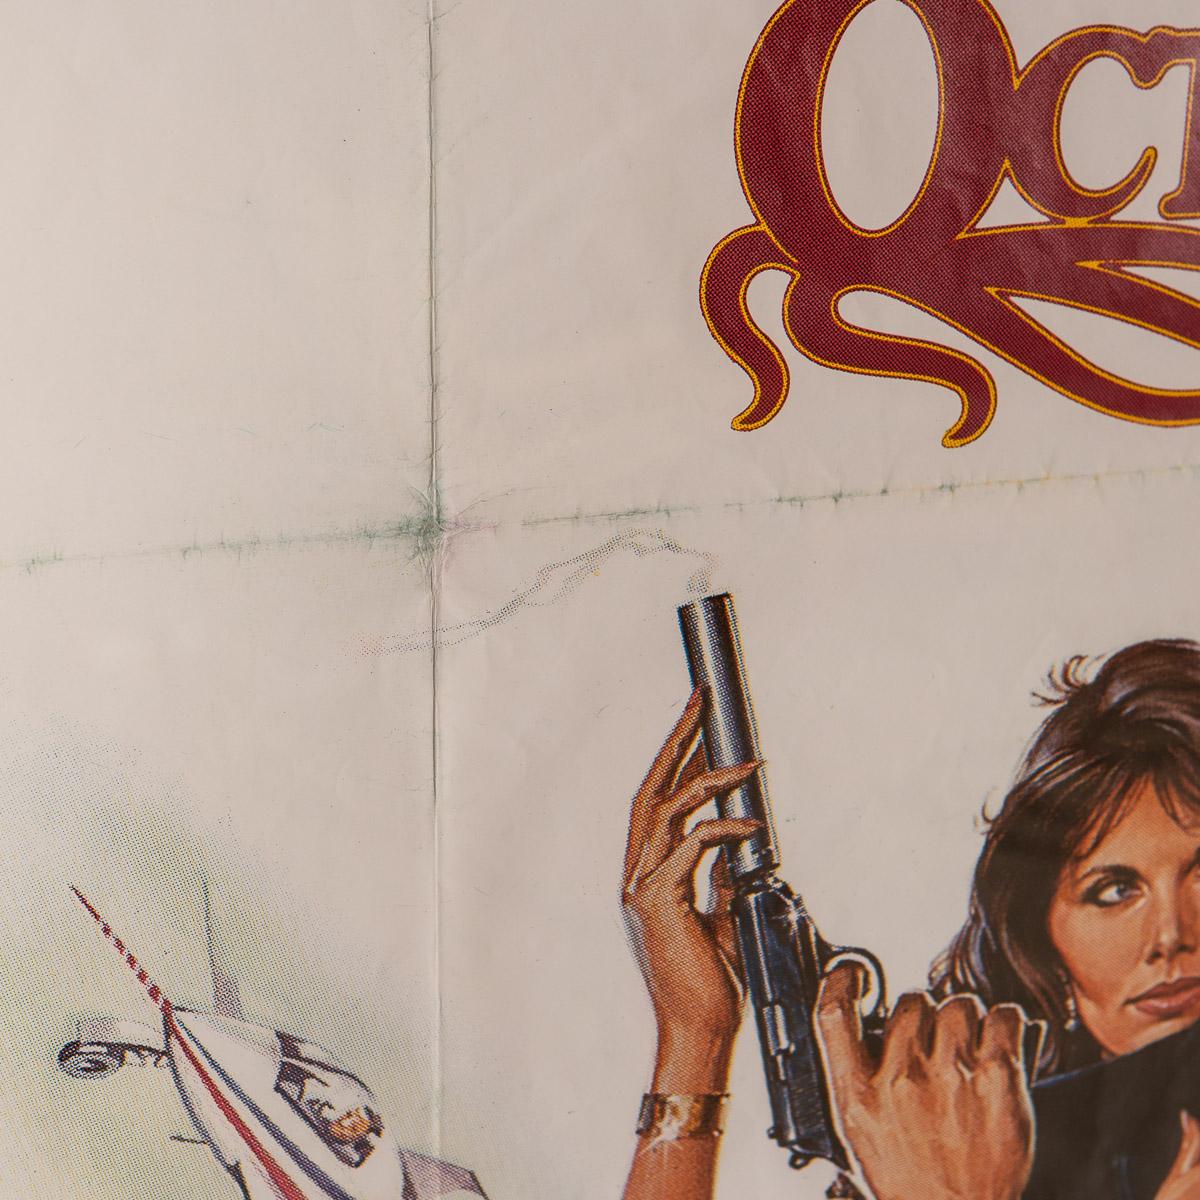 Original French Release James Bond 'Octopussy' Poster, 1983 5